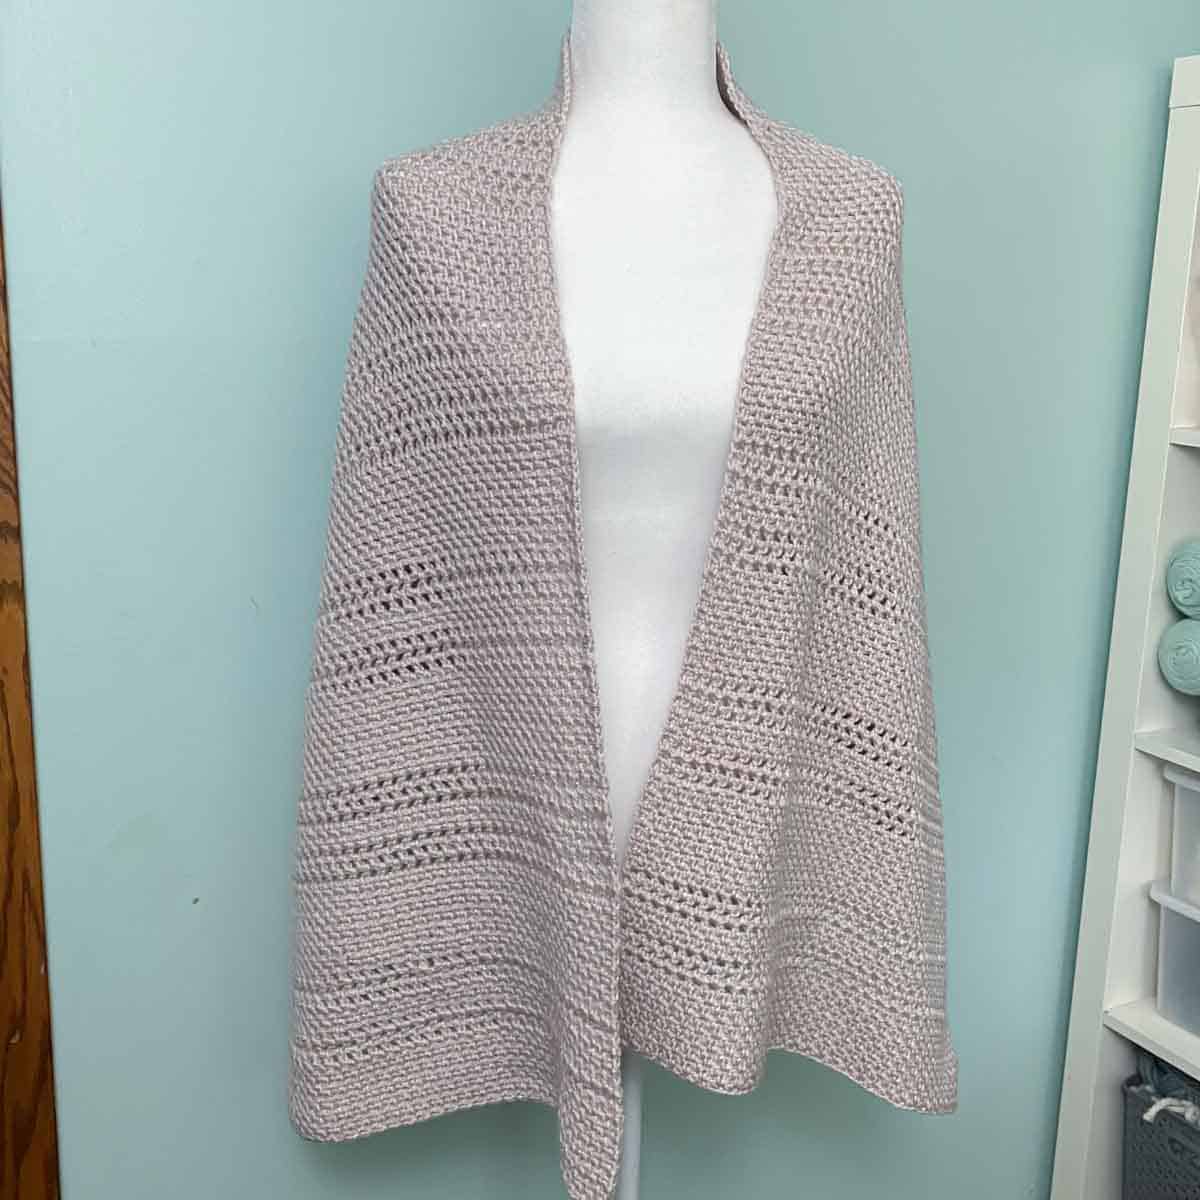 simple crochet shawl in a neutral color draped over the shoulders of a mannequin